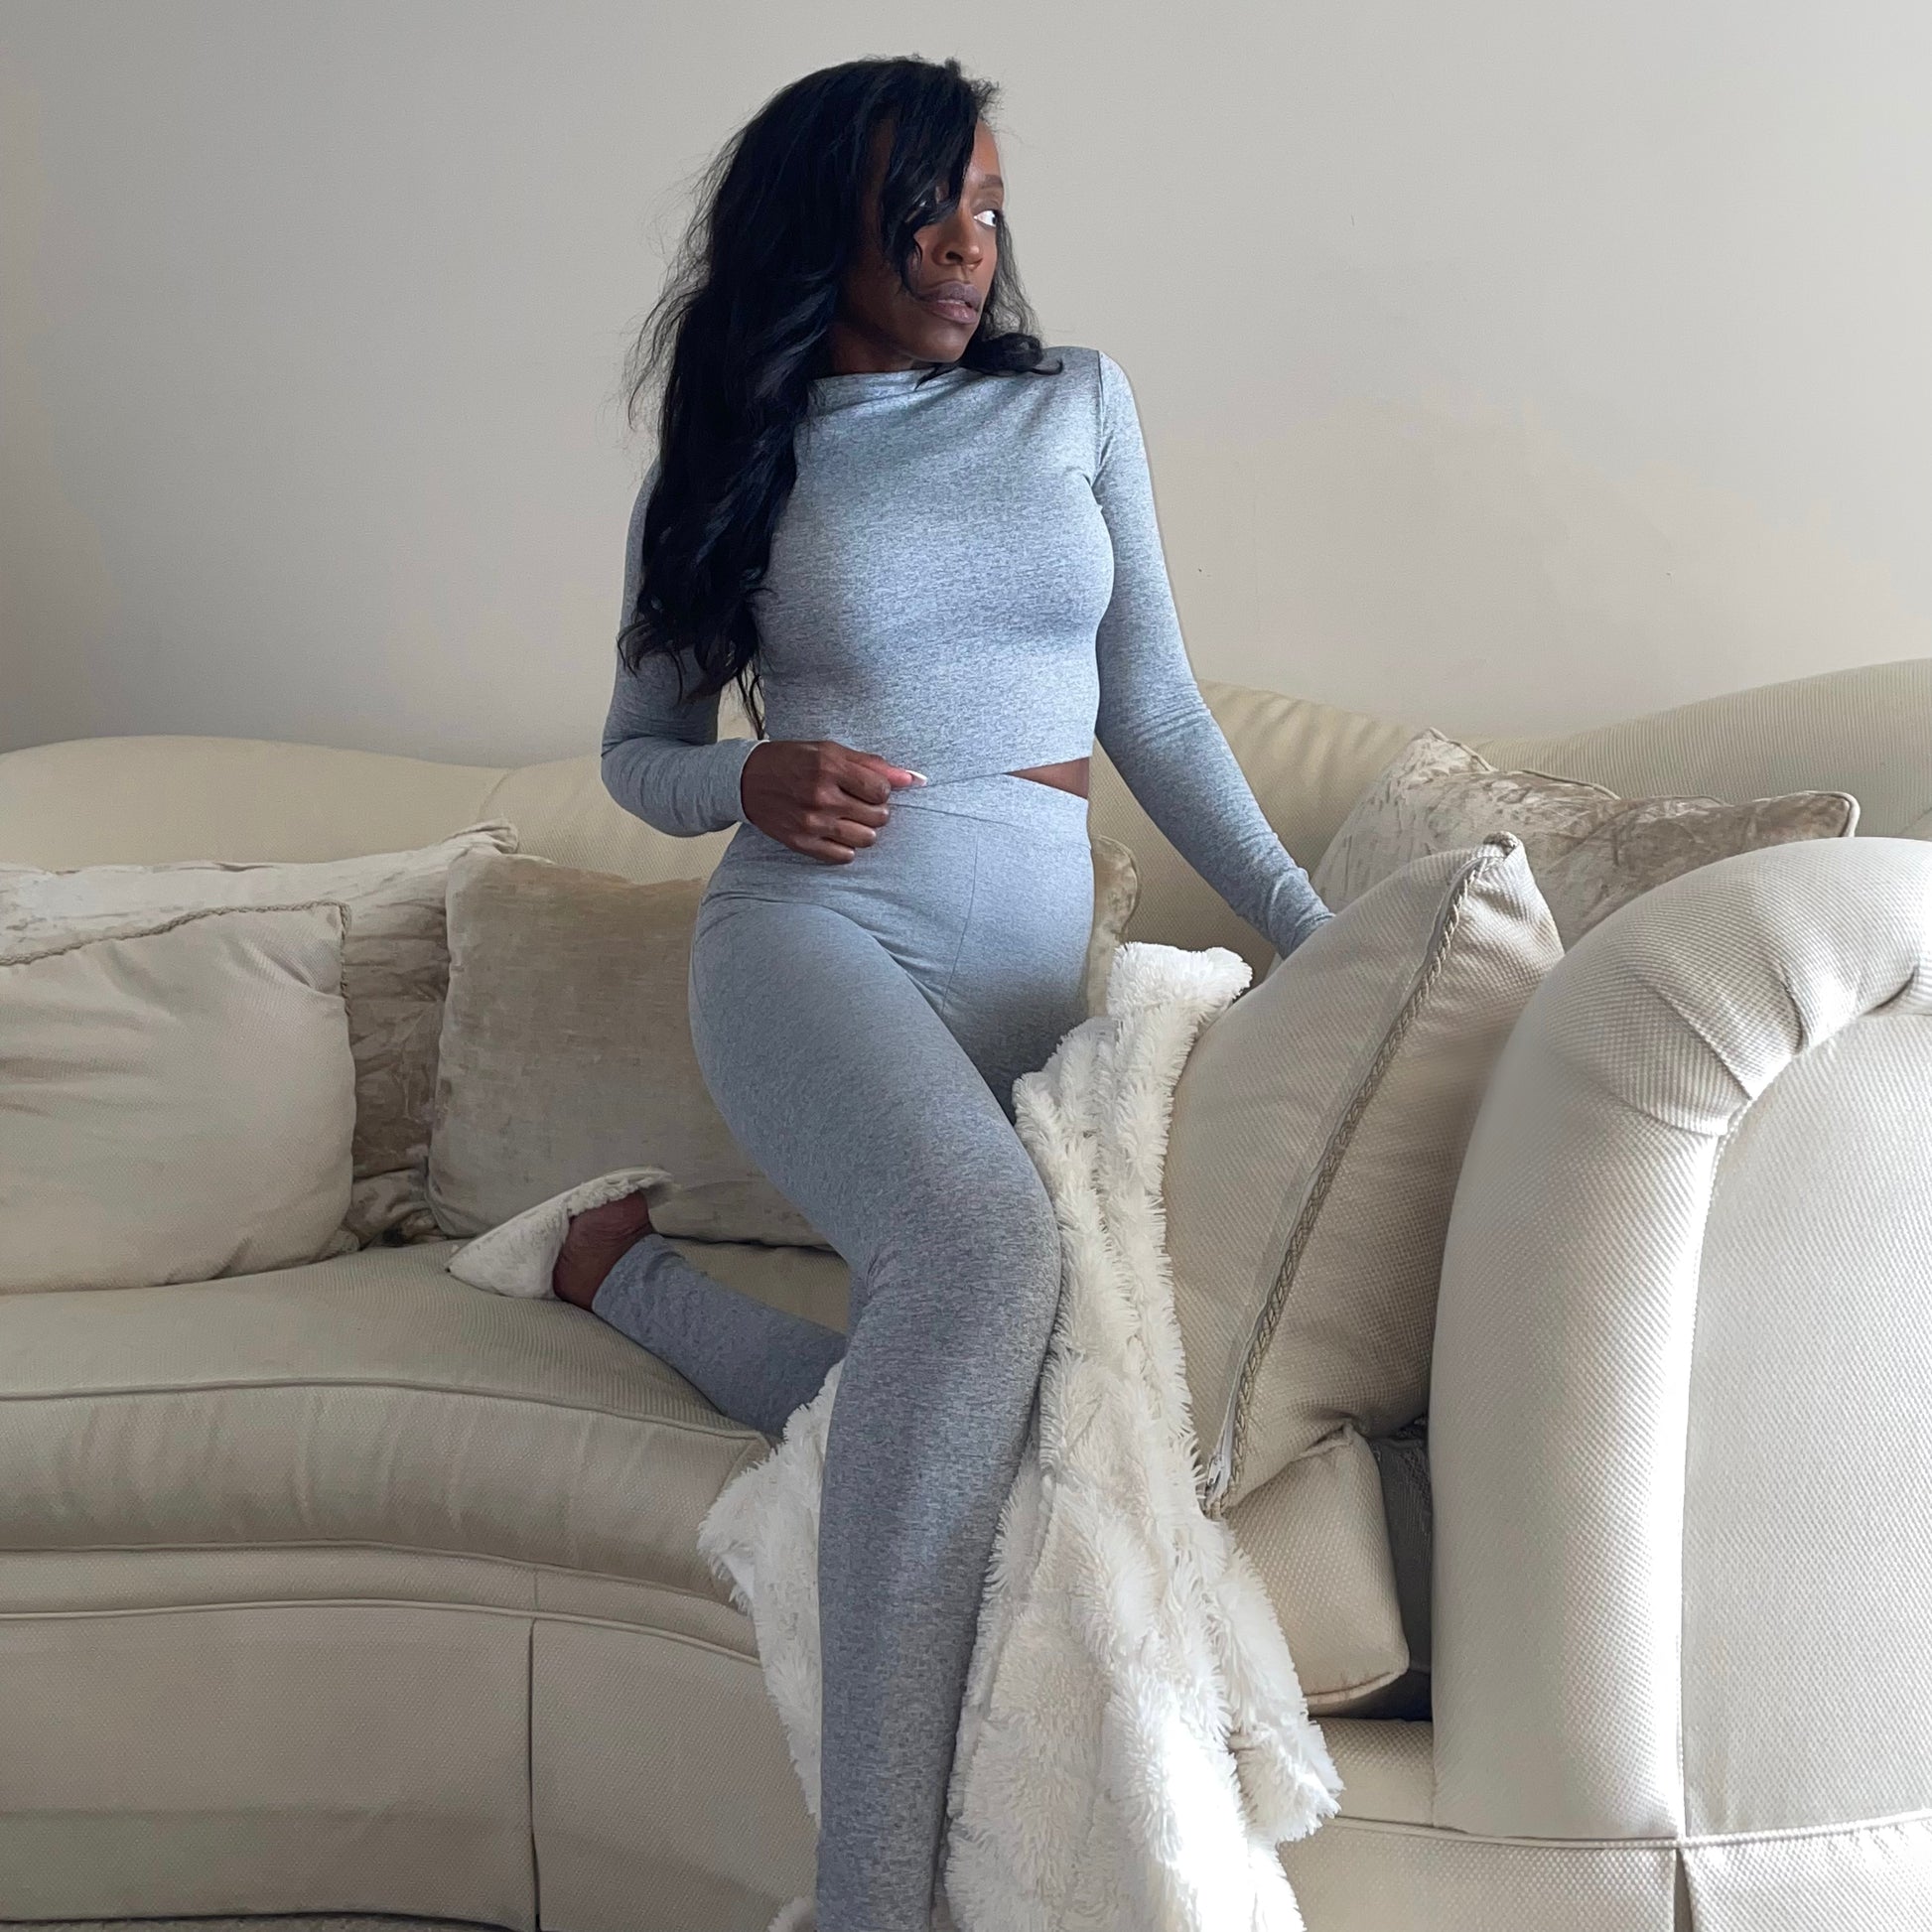 Model on cozy couch wearing High Waisted Cotton Full Length Leggings Gray EveryDay Stretch Legging